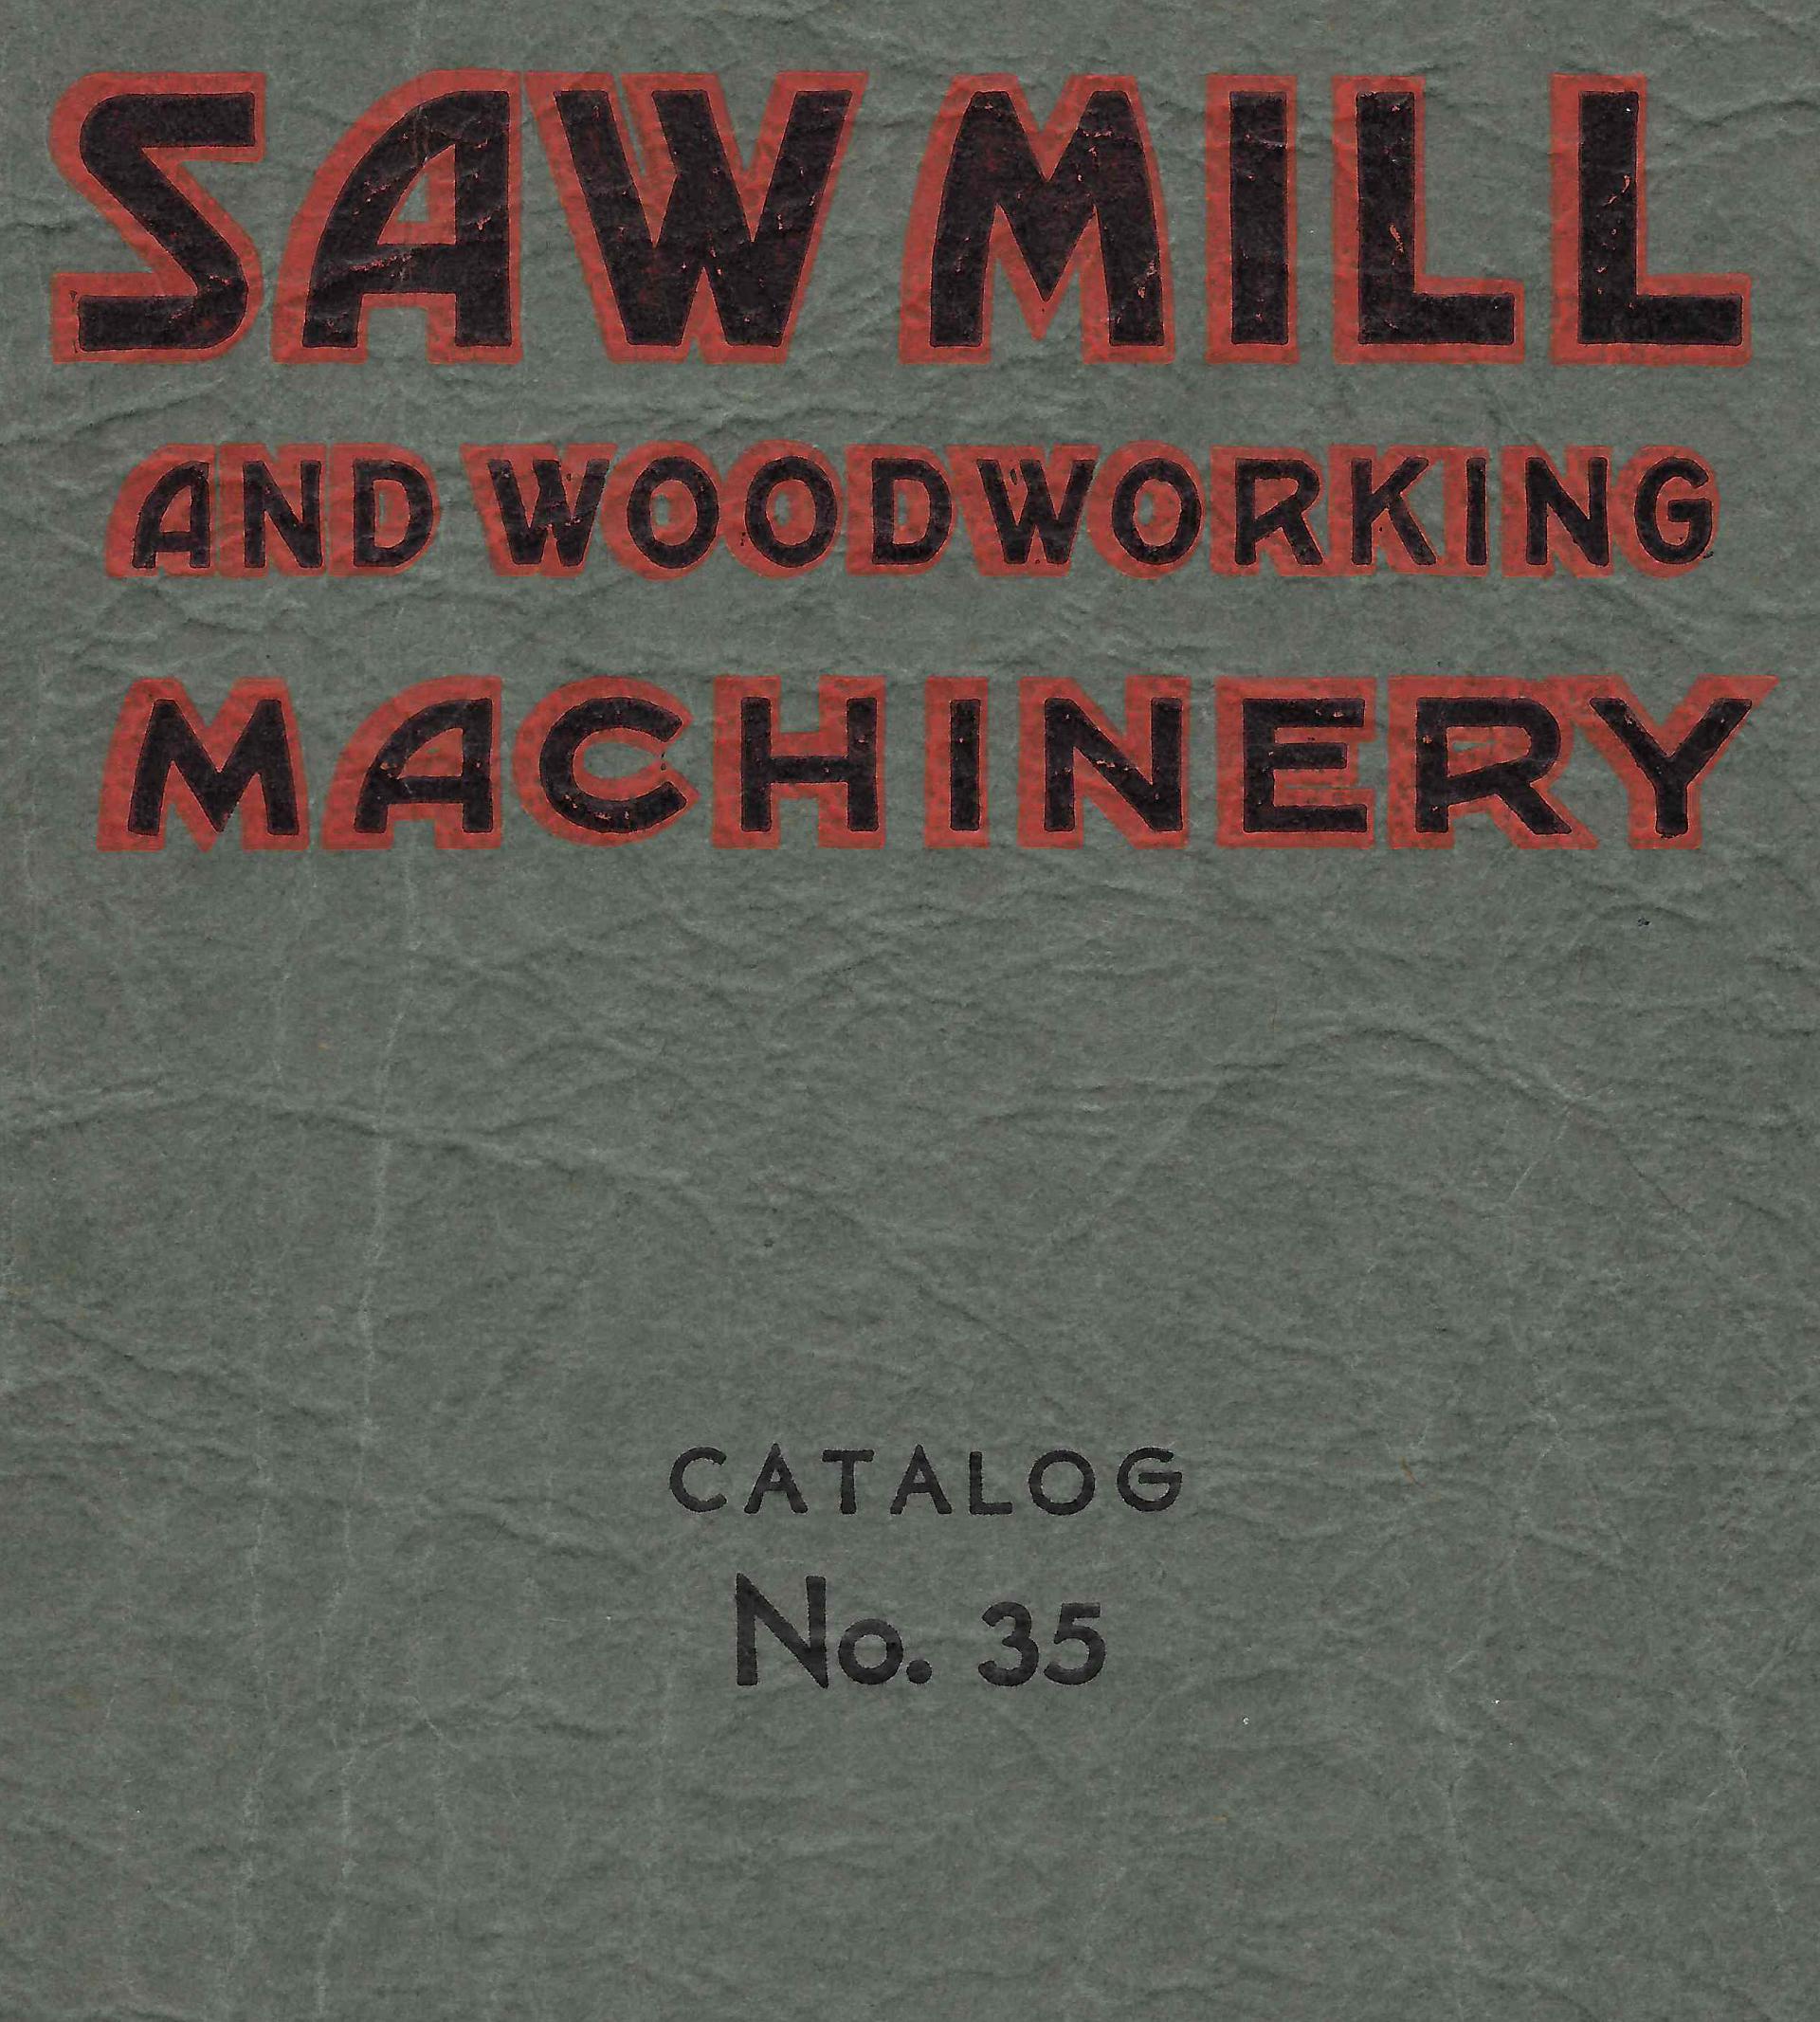 Cover of Saw Mill and Woodworking Machinery catalog.